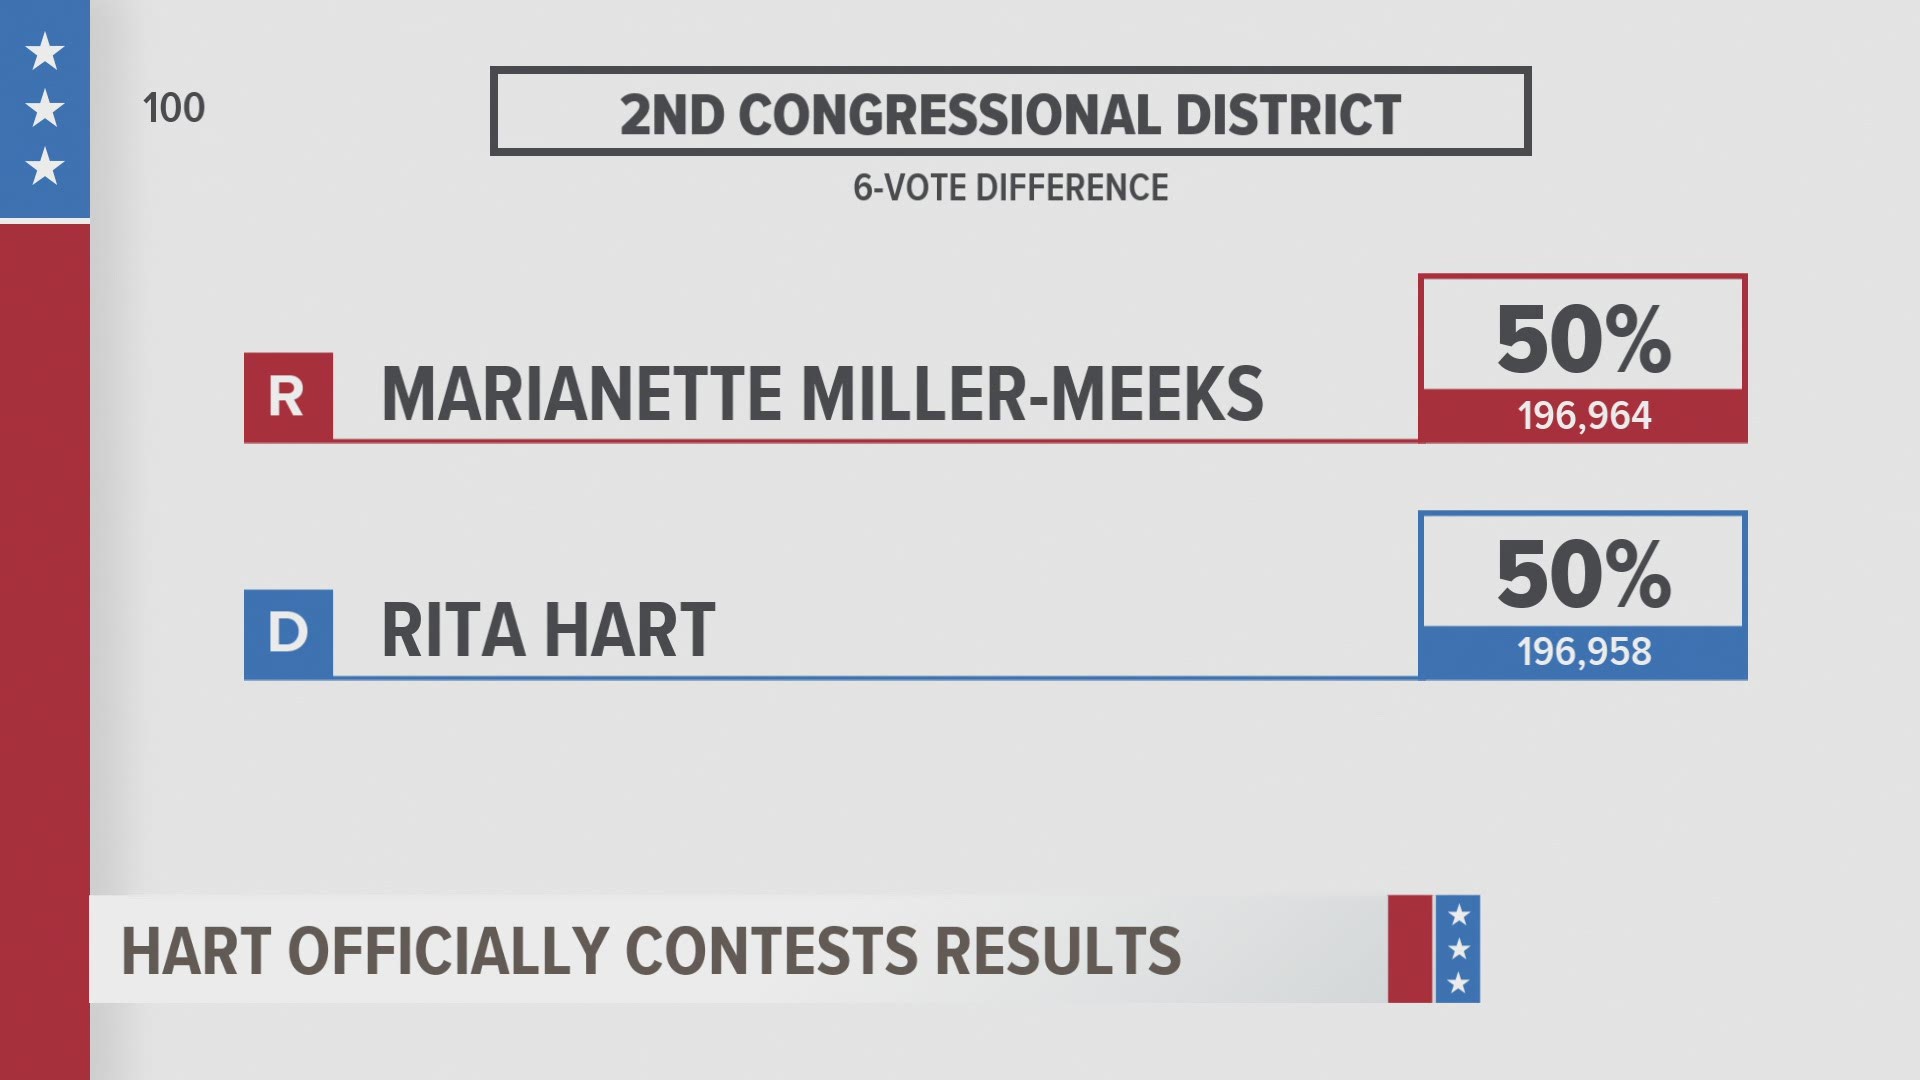 Hart is contesting the six-vote margin in Iowa's Second Congressional District race.